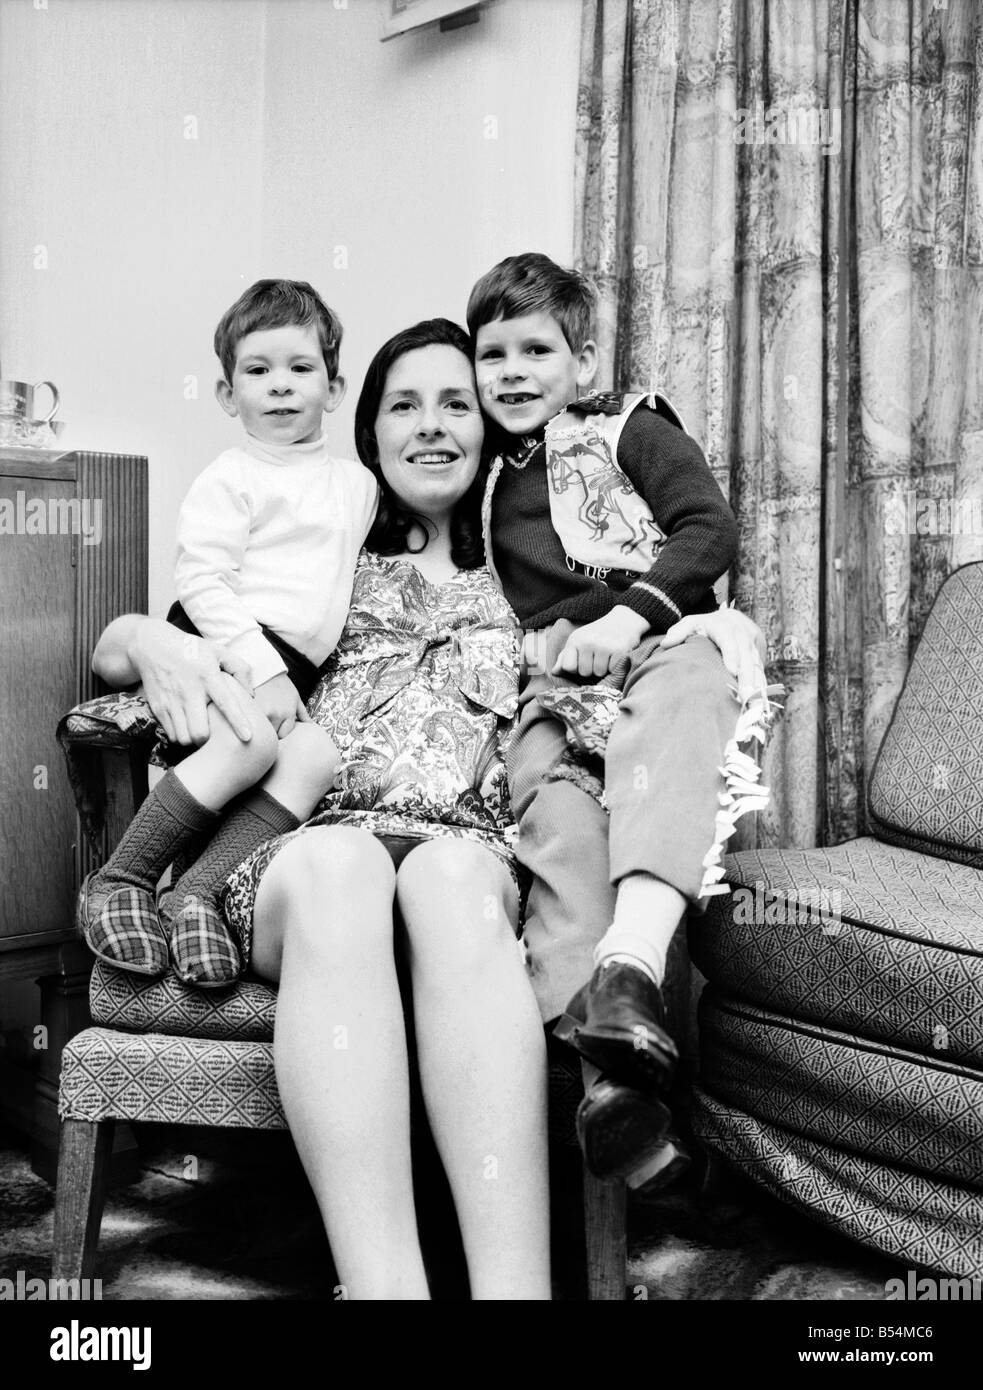 mrs-sandra-charlott-with-her-two-sons-neil-2-on-left-and-colin-6